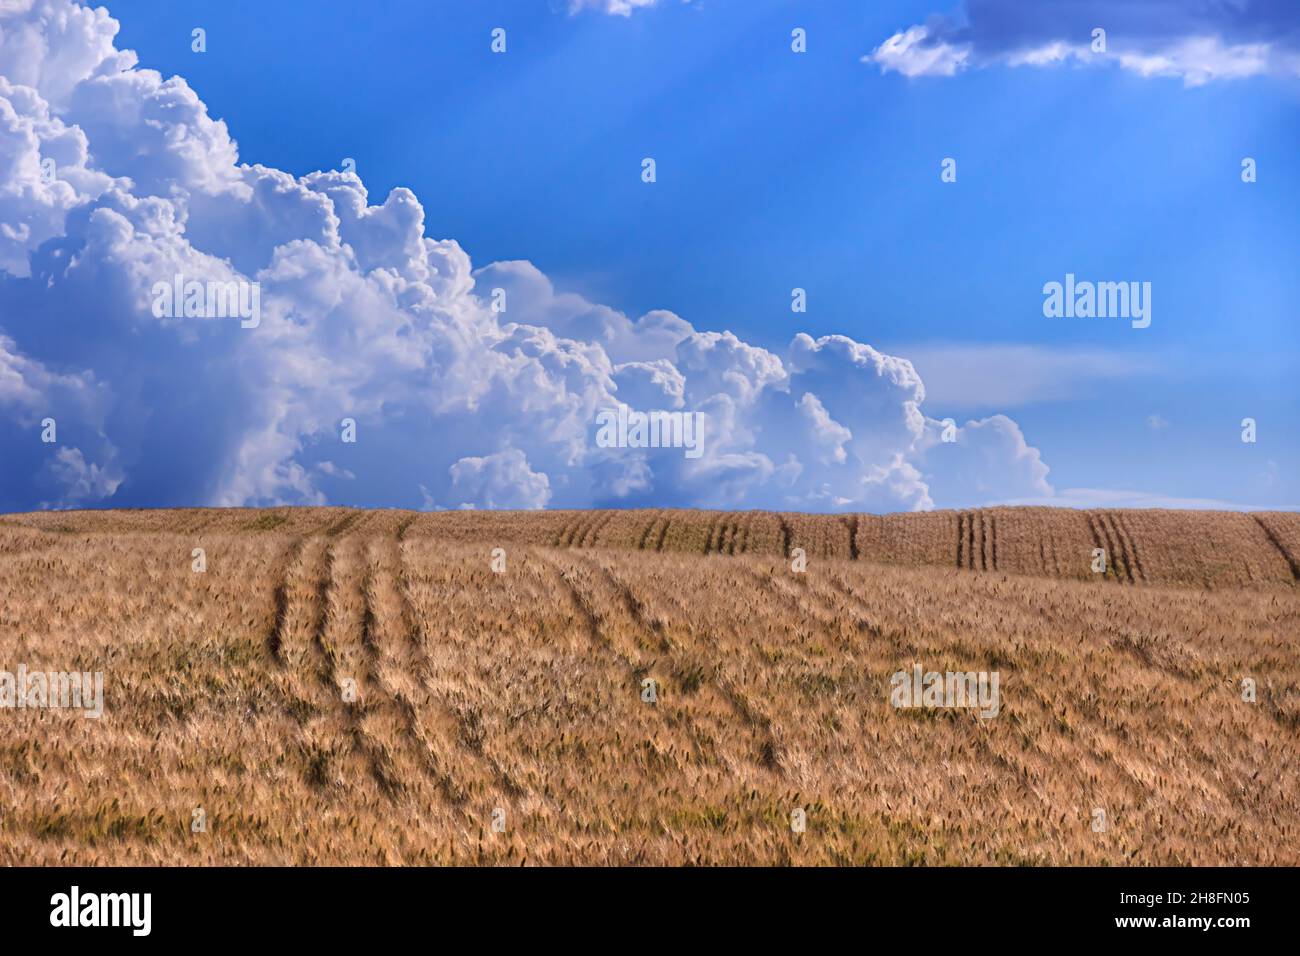 Clouds over the wheat field: organic shapes and forms have a natural look and a flowing and curving appearance. Stock Photo